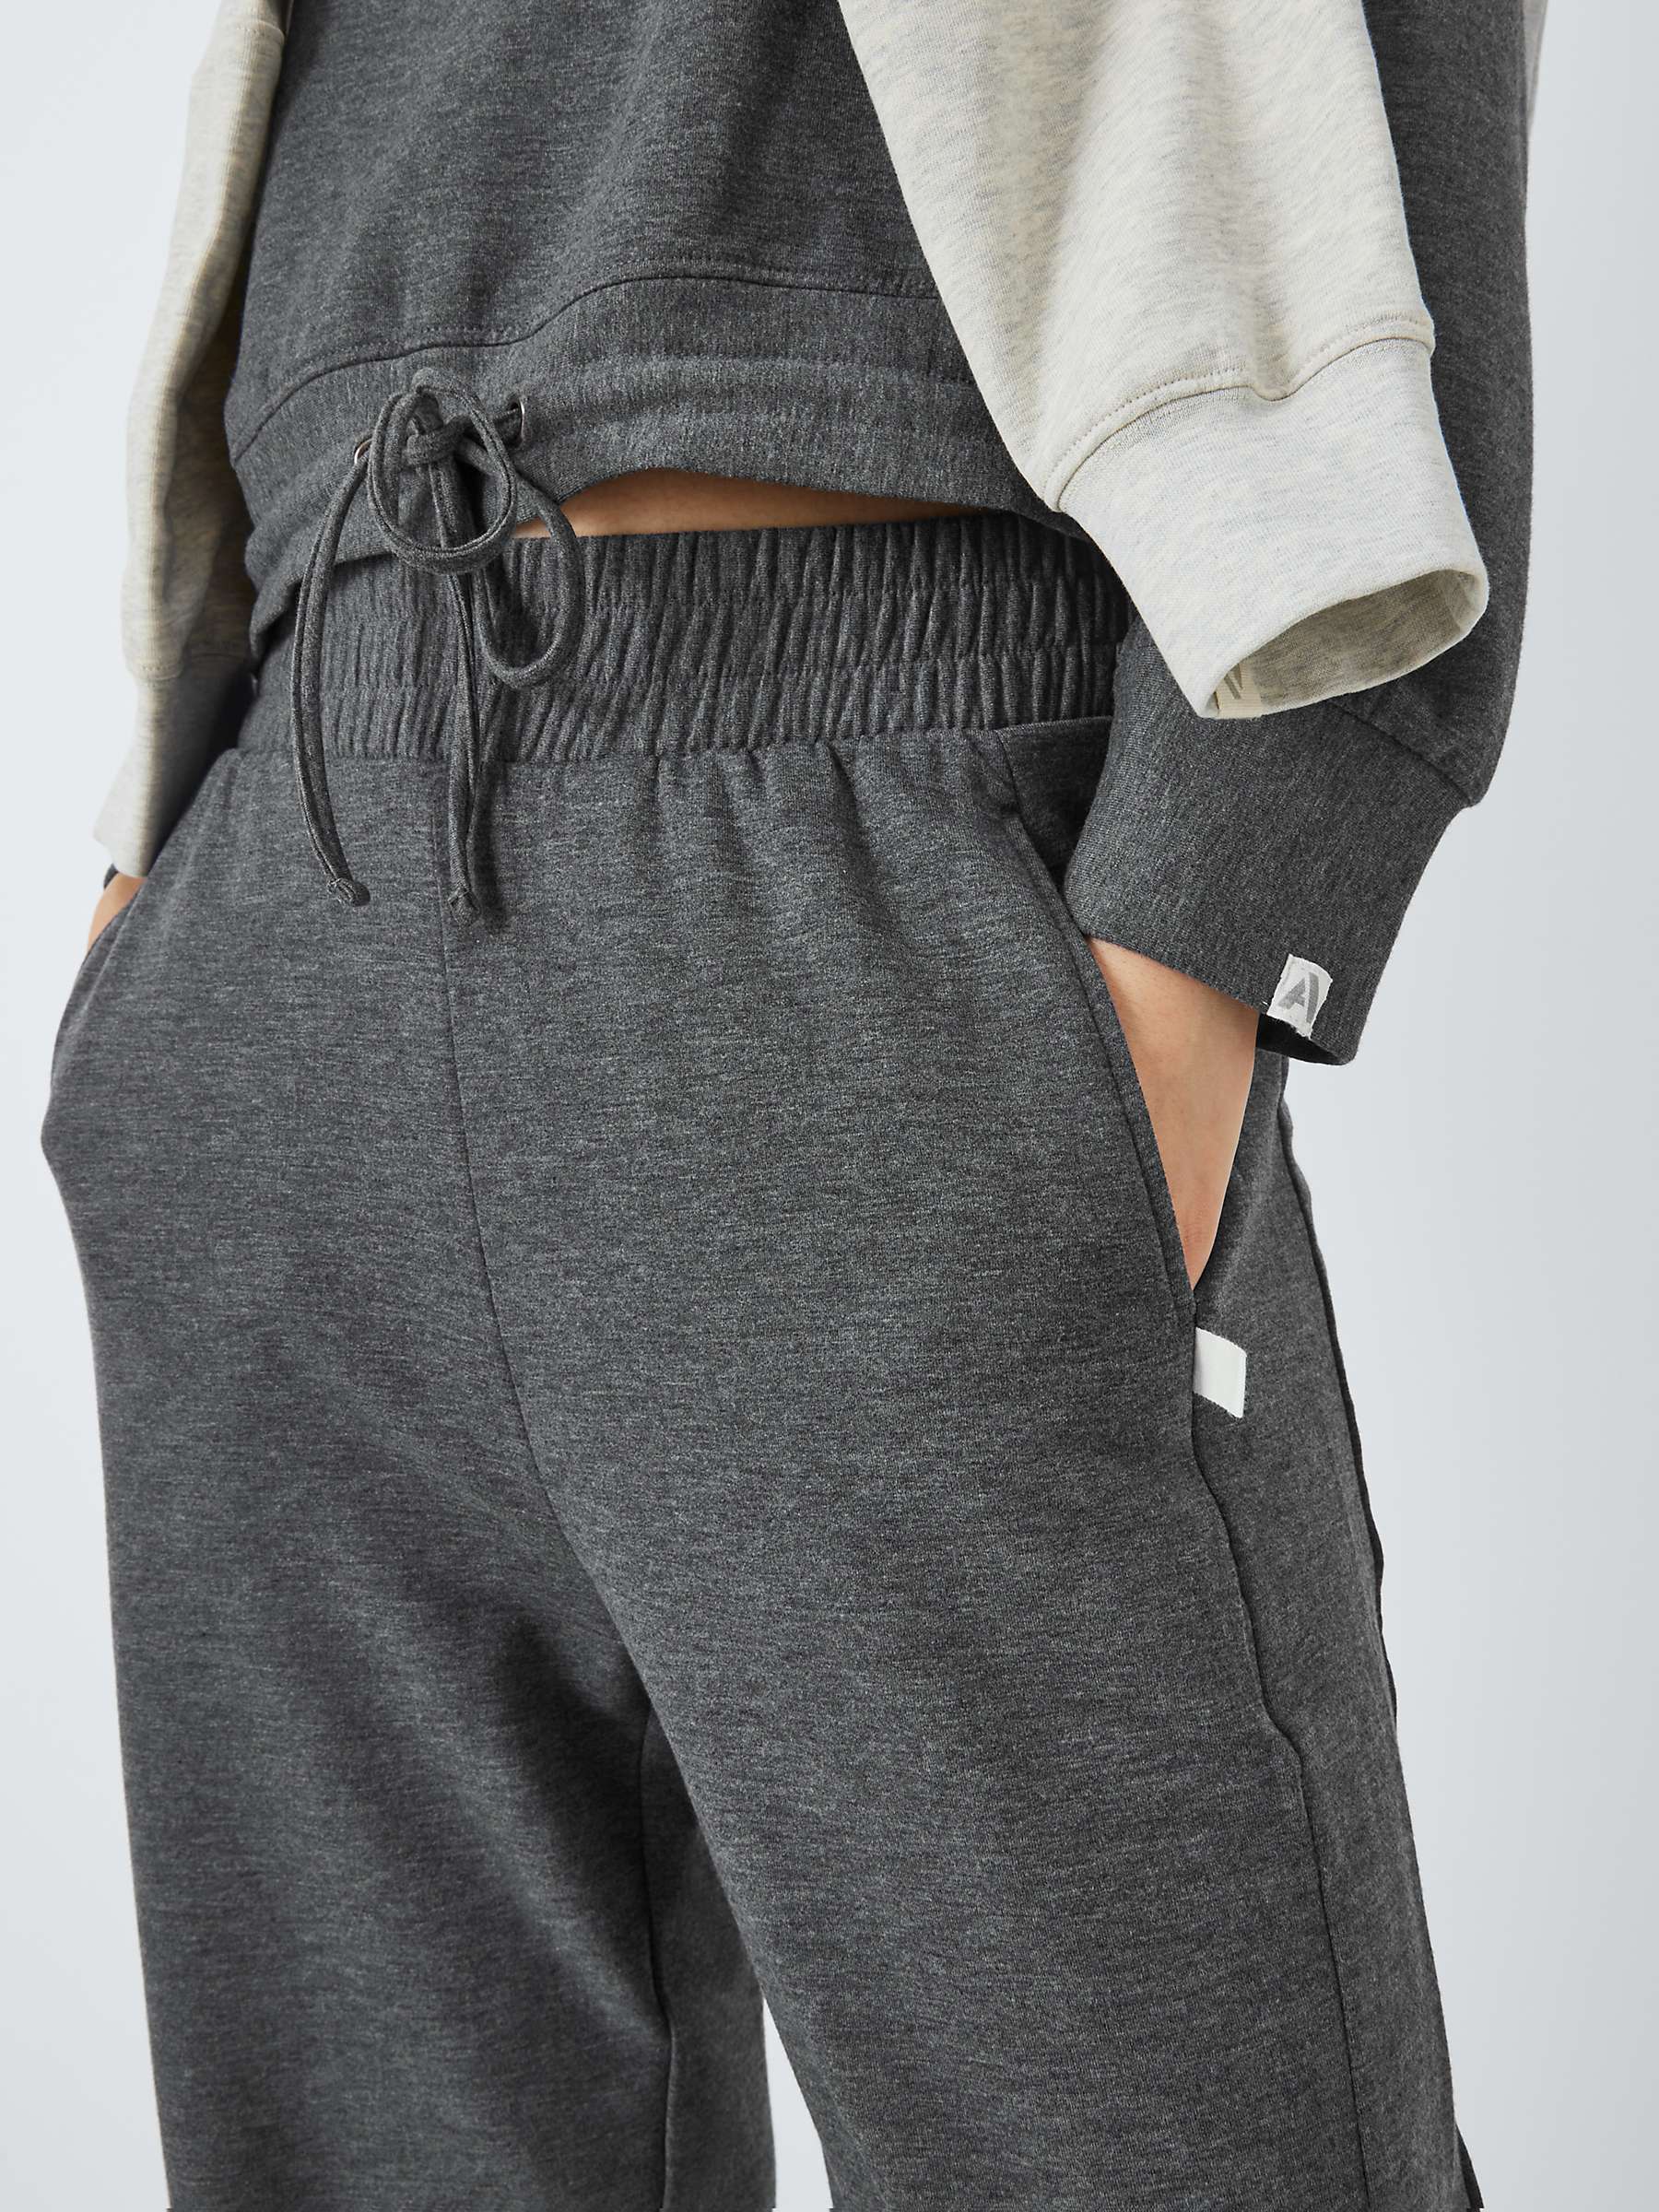 Buy John Lewis ANYDAY Soft Joggers Online at johnlewis.com